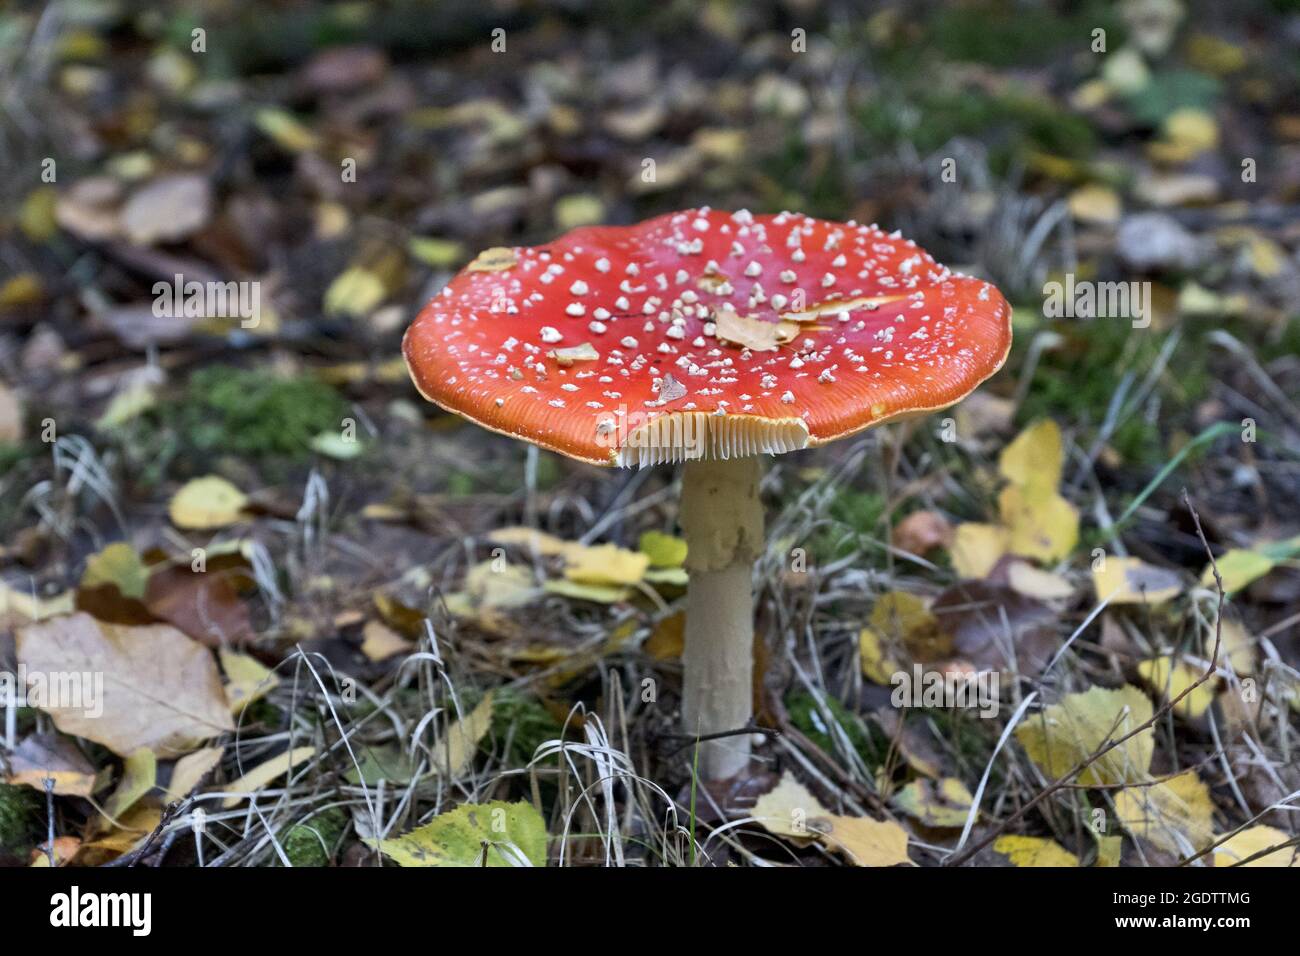 Amanita muscaria, commonly known as the fly agaric or fly amanita, is a basidiomycete of the genus Amanita. Stock Photo